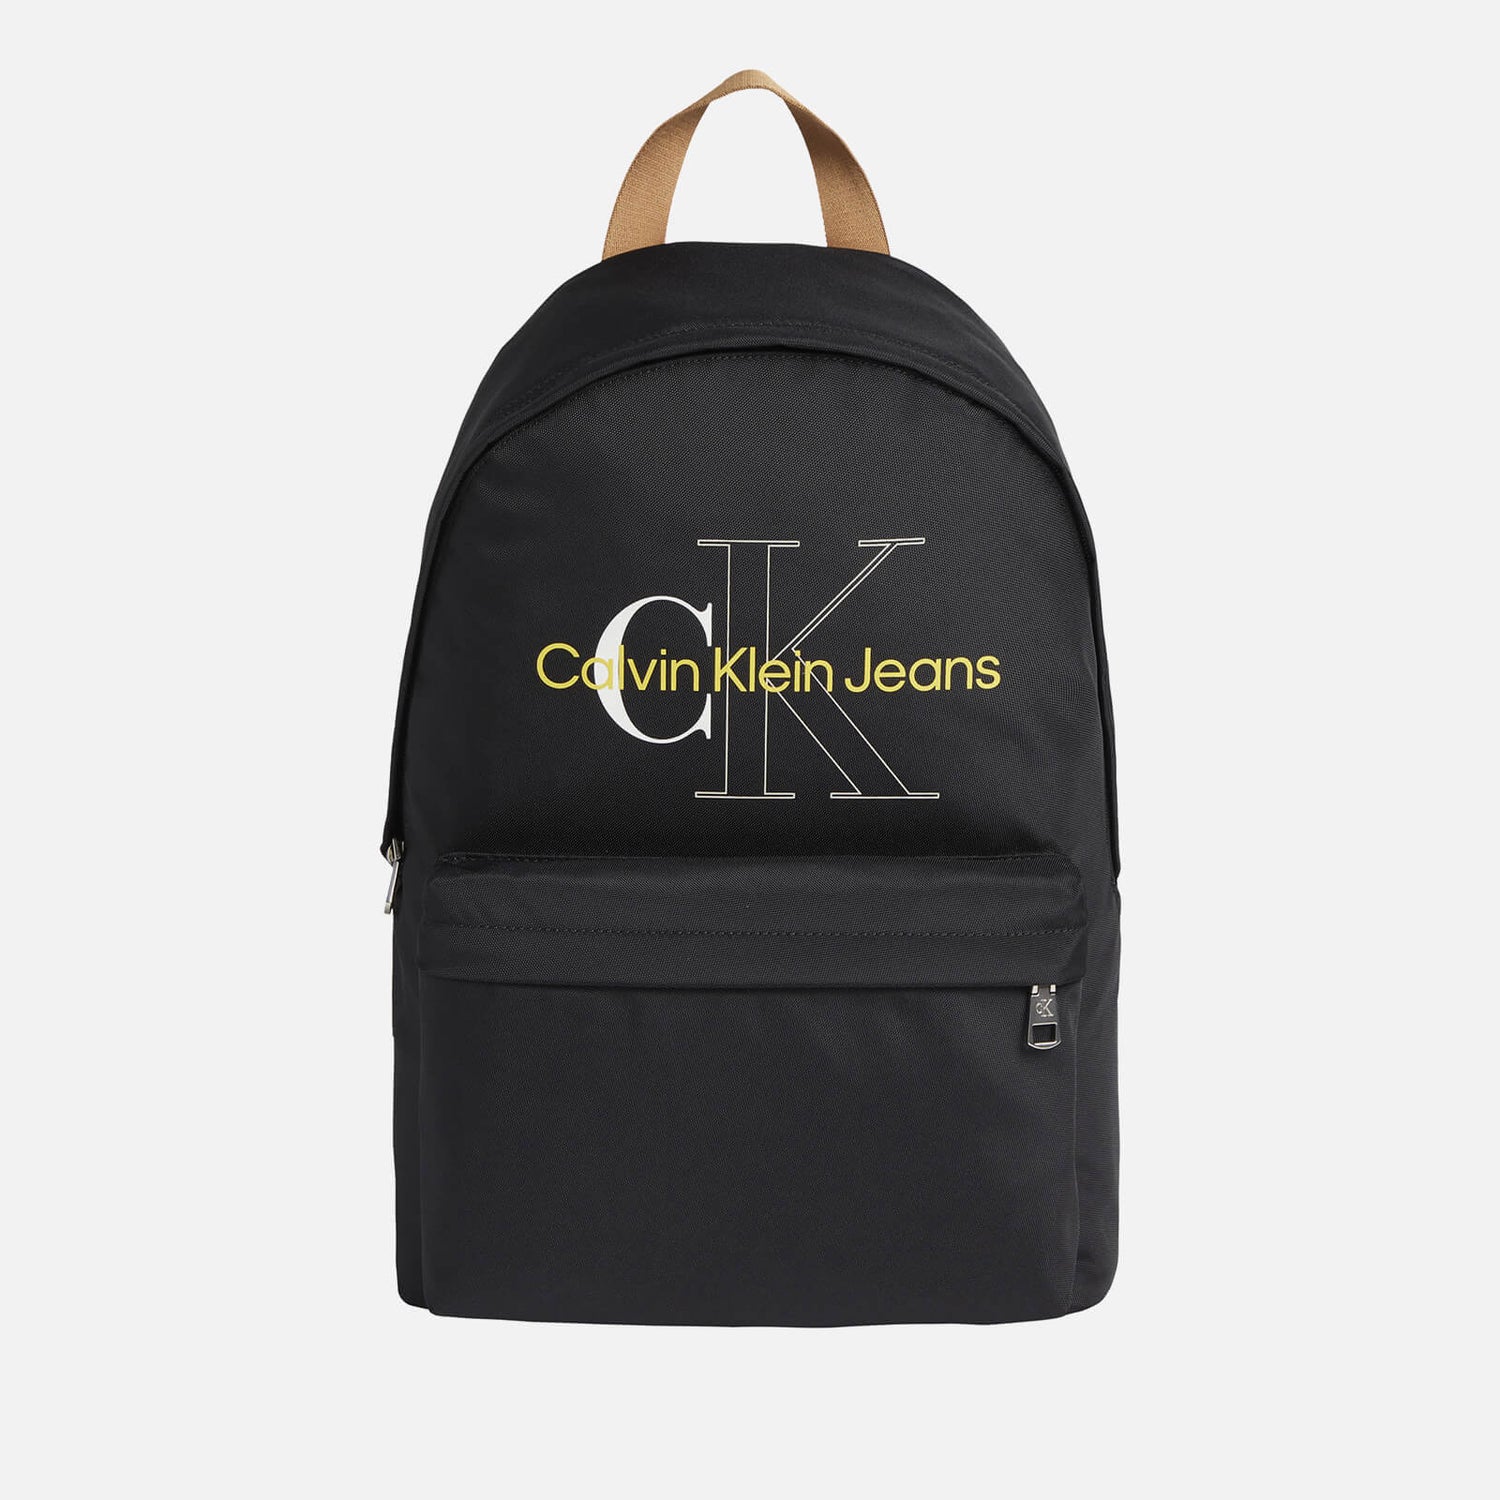 Calvin Klein Jeans Men's Recycled Polyester Round Backpack - Black